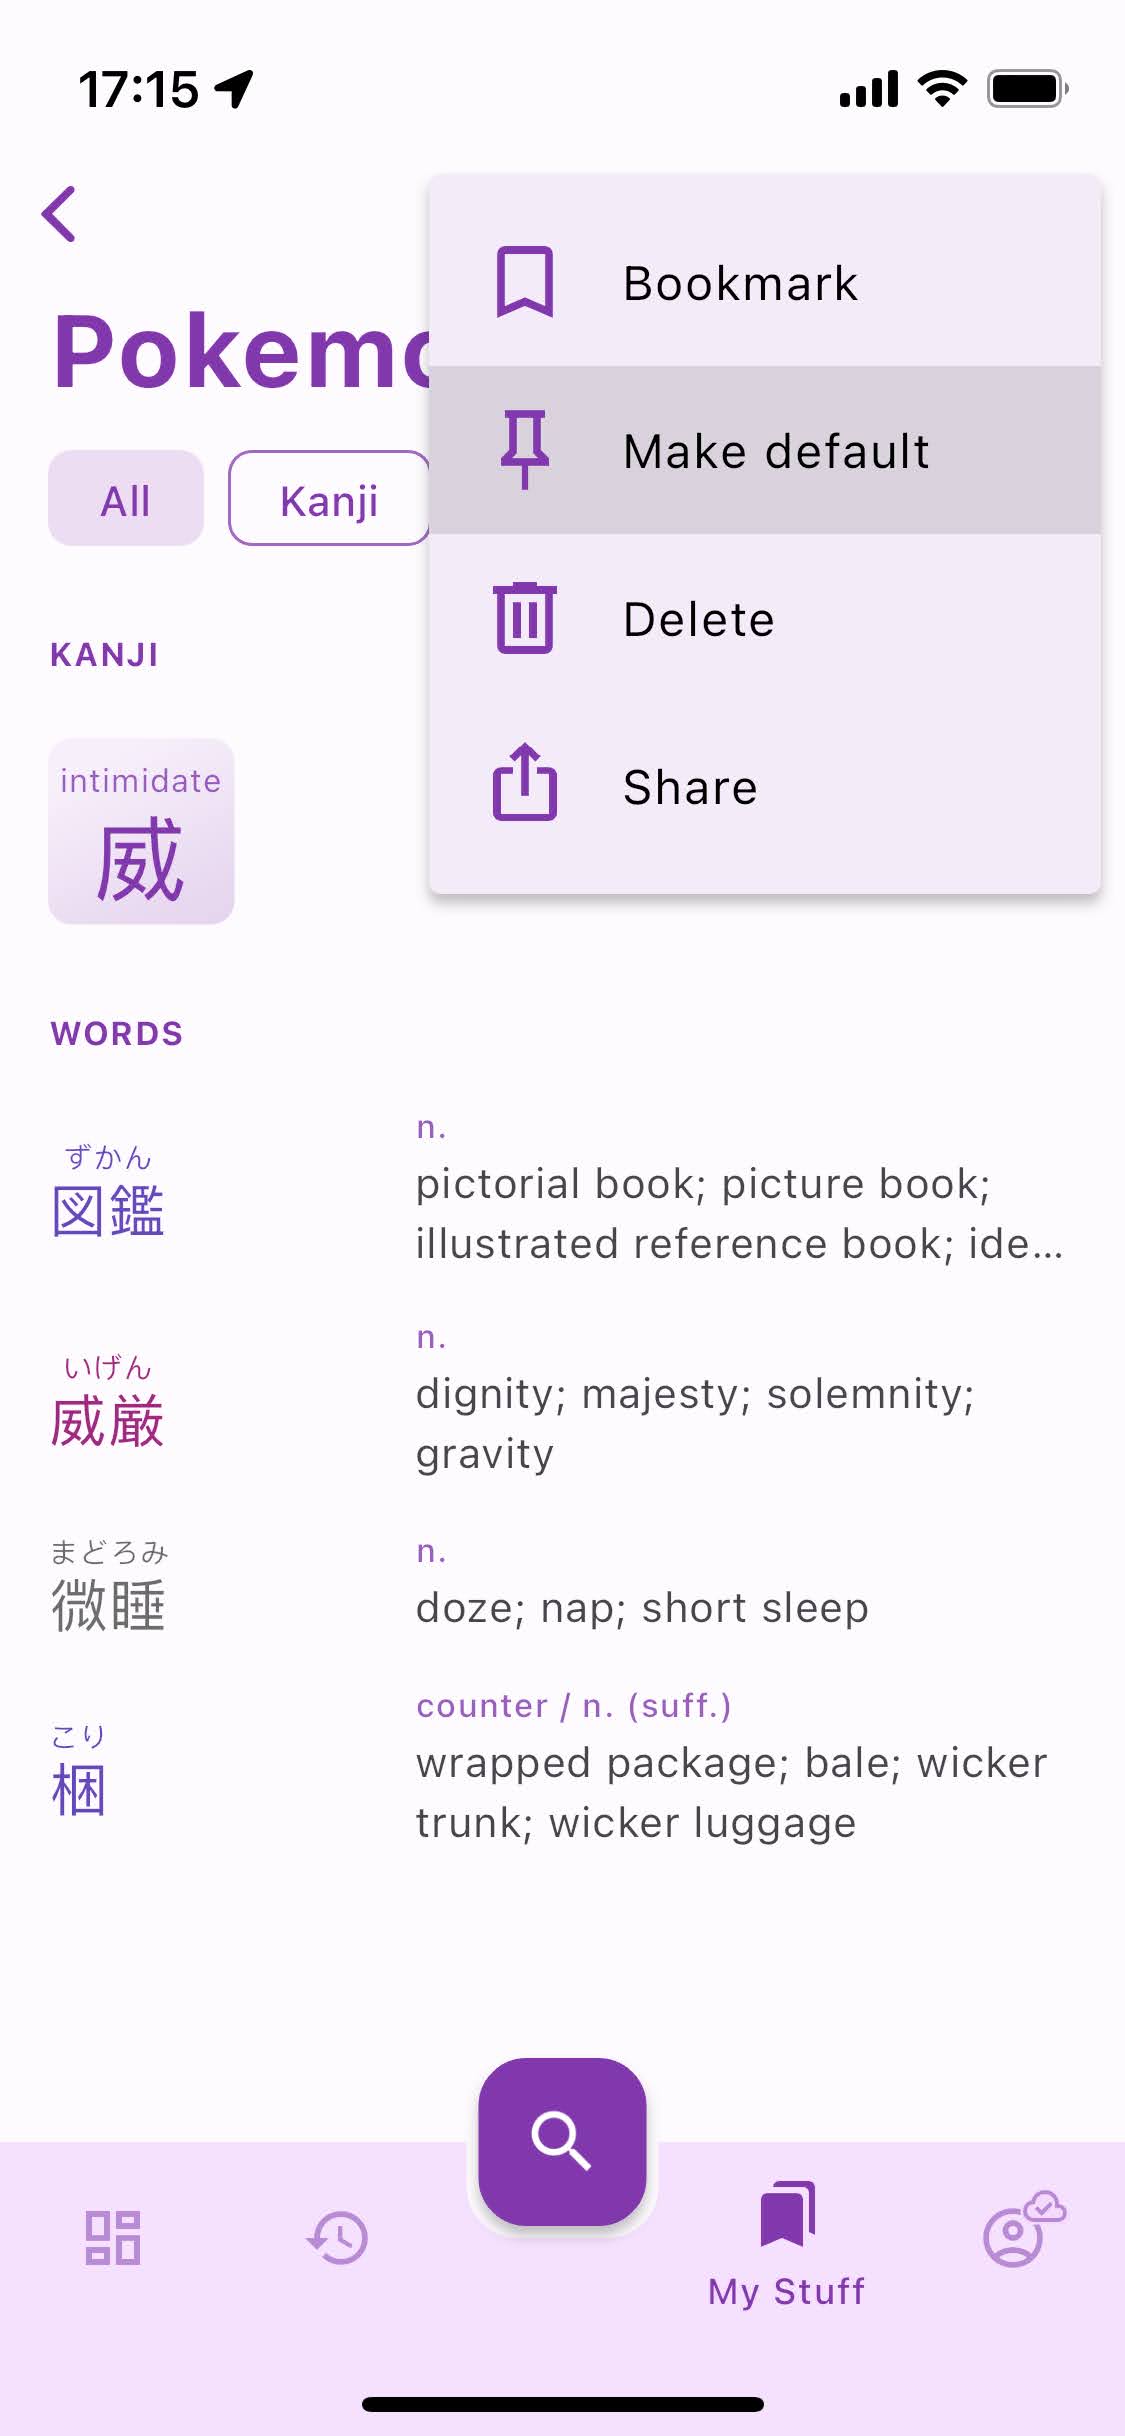 Sentence Sharing, One-tap Bookmark, User Profiles, and more